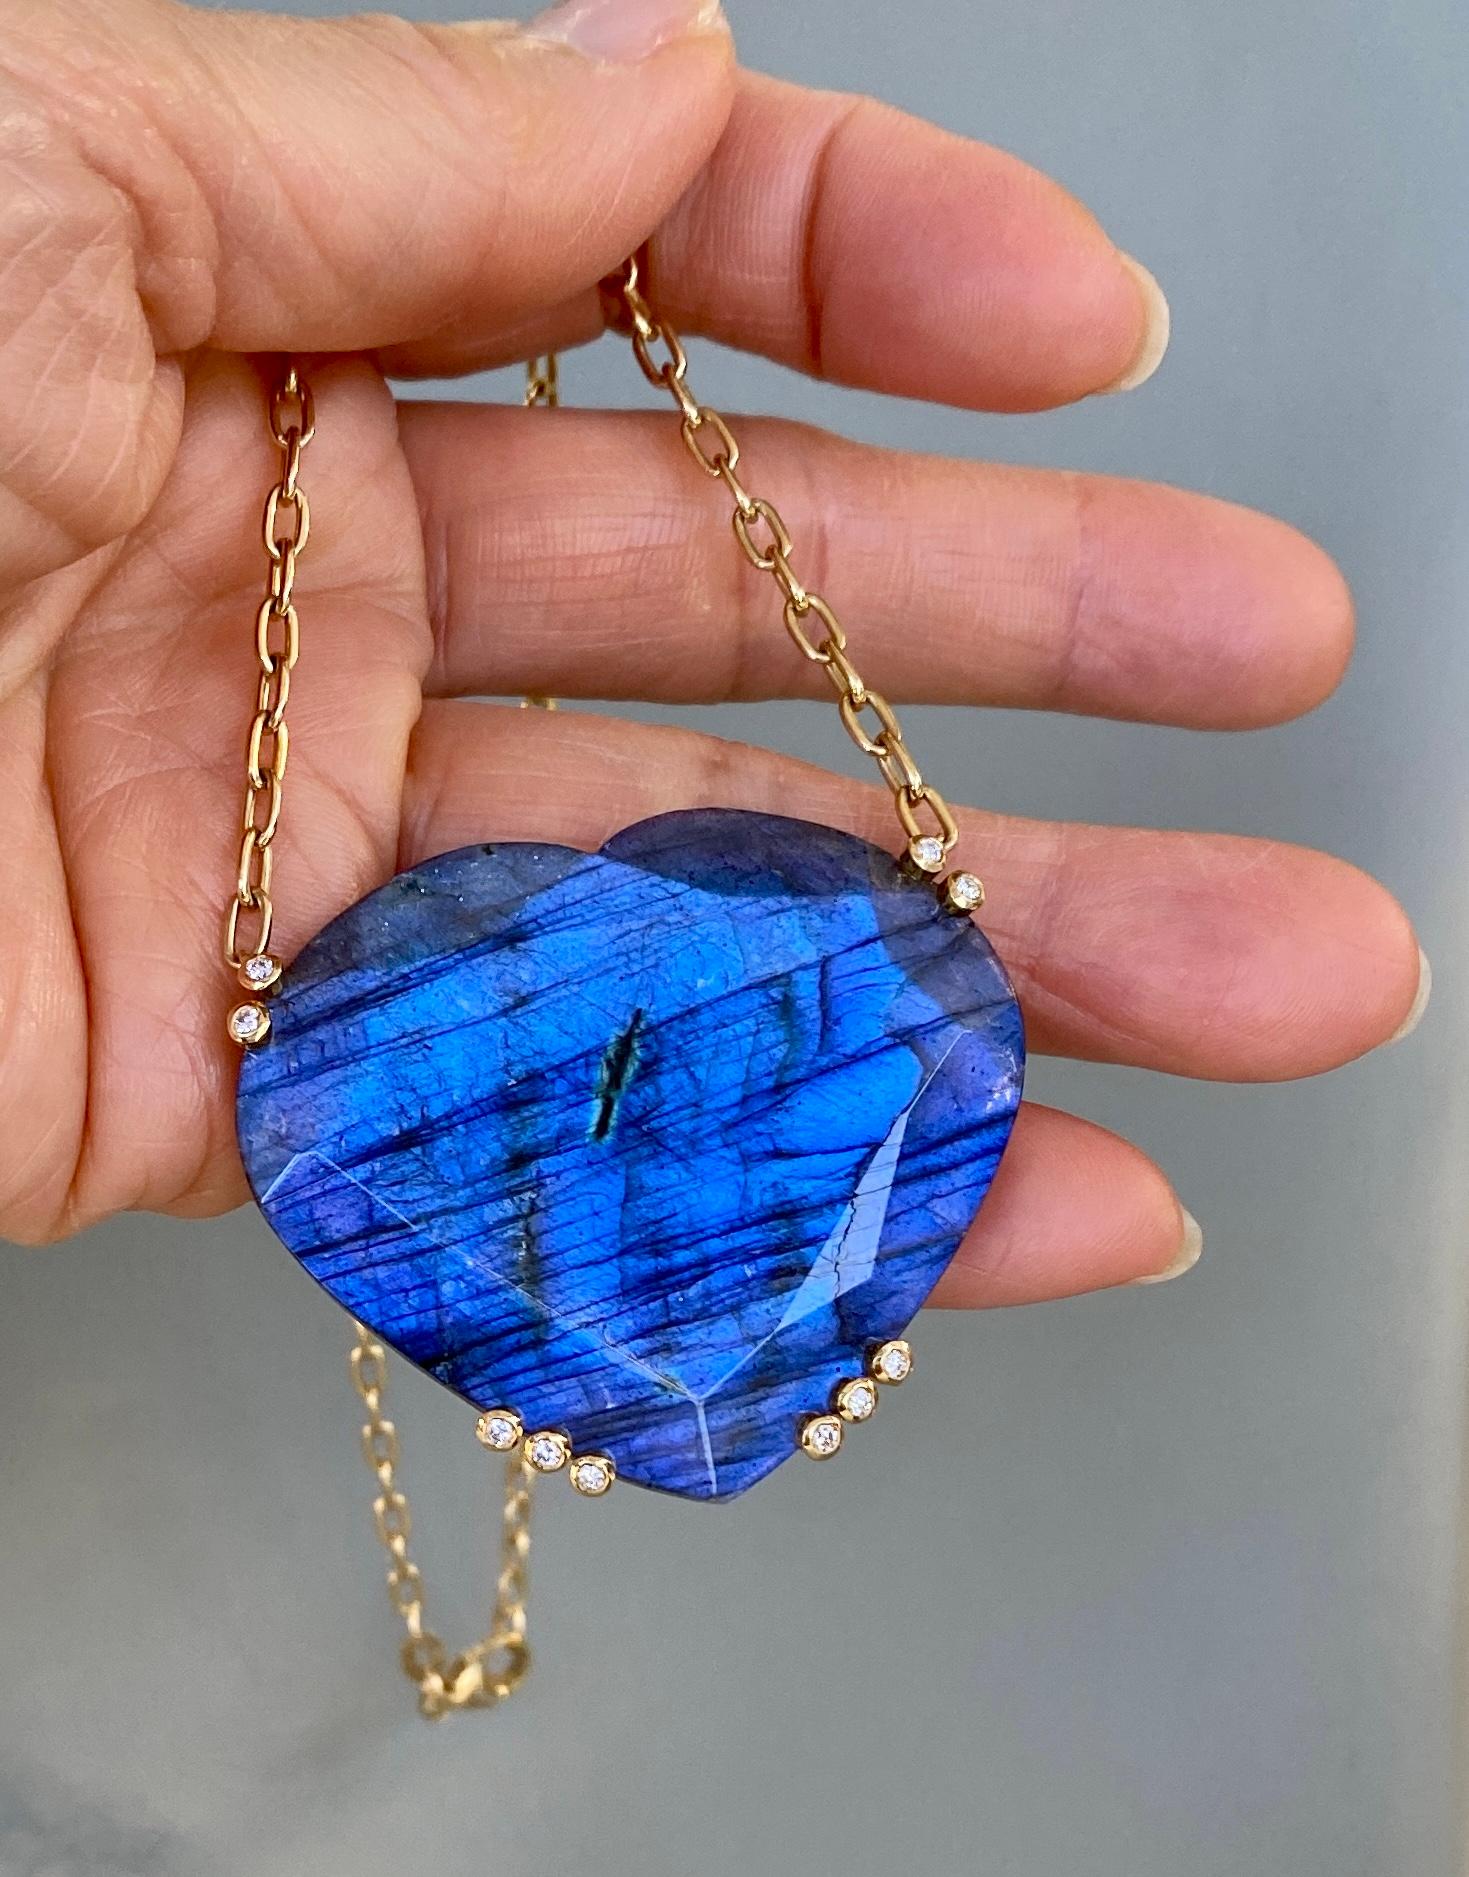 A one-of-a-kind large heart shaped labradorite and diamond pendant necklace, It is handcrafted in 18 karat yellow gold and hangs on a 16 inch gold chain of 14 karats.

This stunning large heart shaped labradorite pendant necklace has perfectly